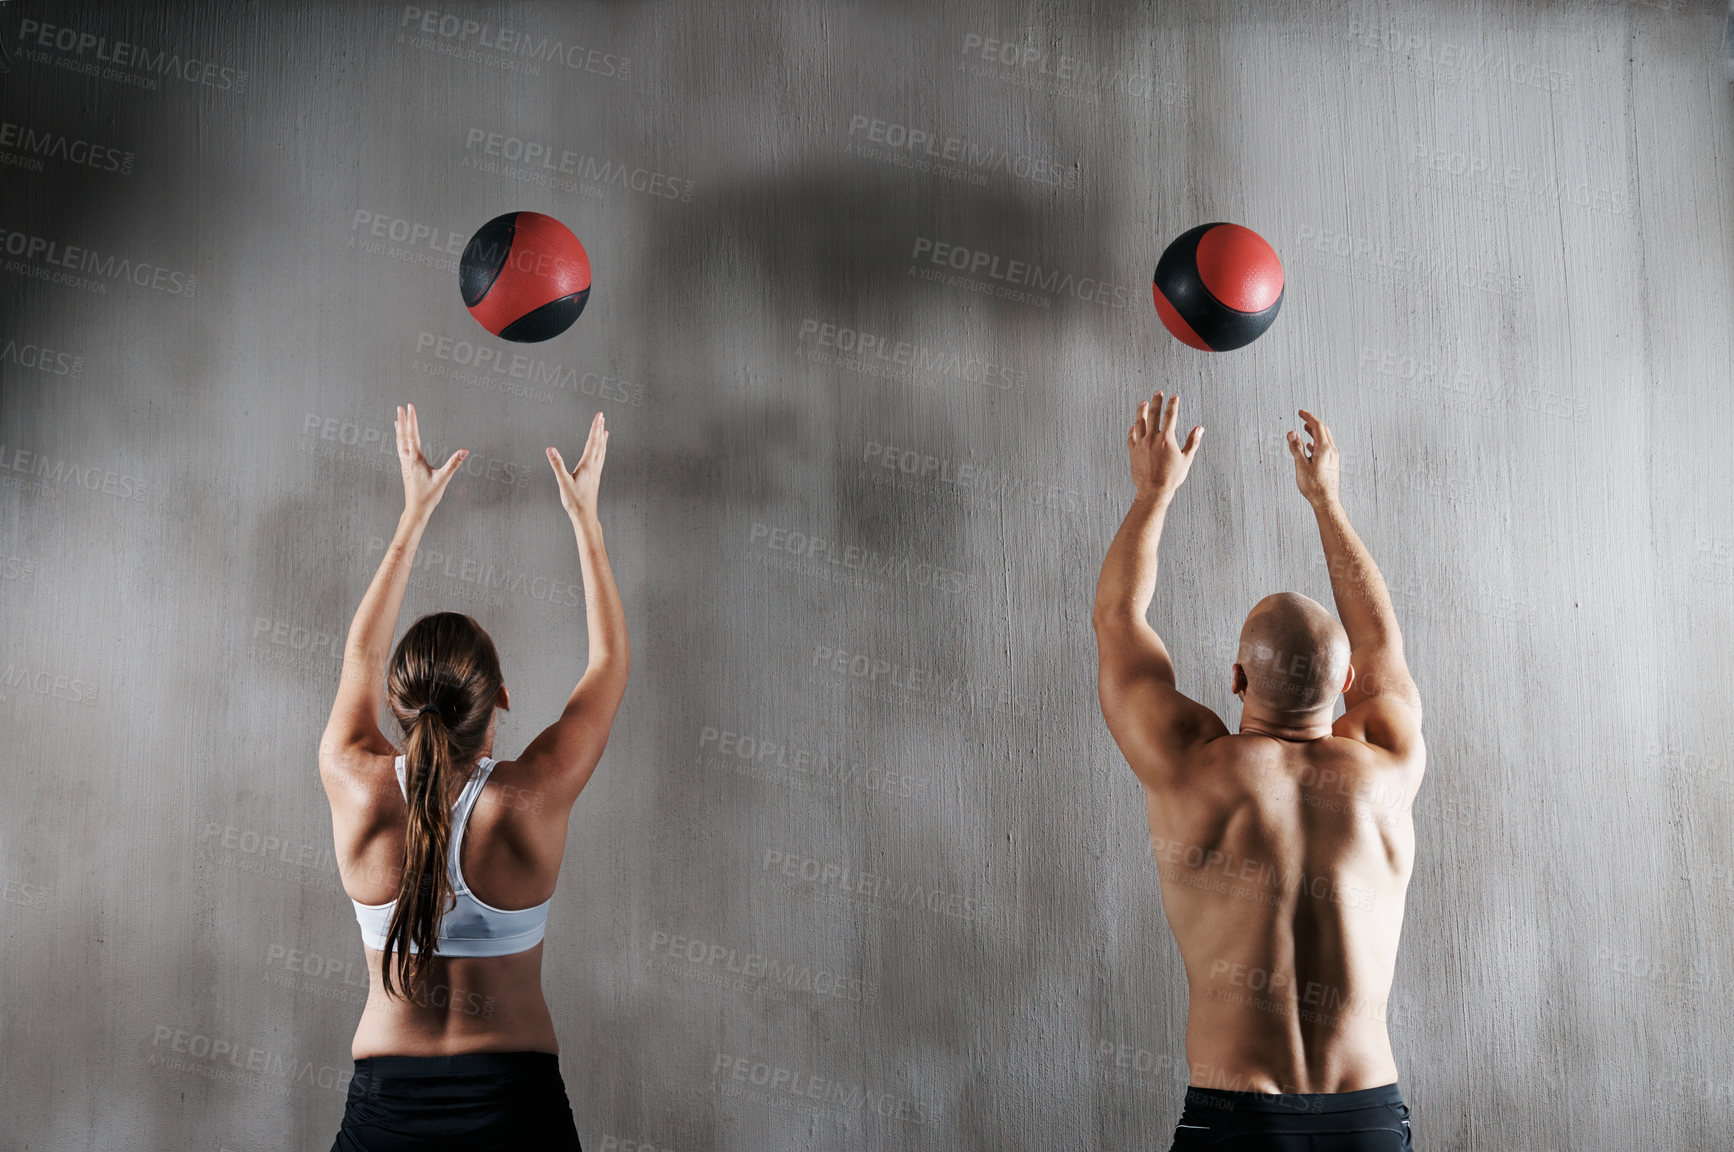 Buy stock photo Shot of a young man and woman working out with medicine balls at the gym